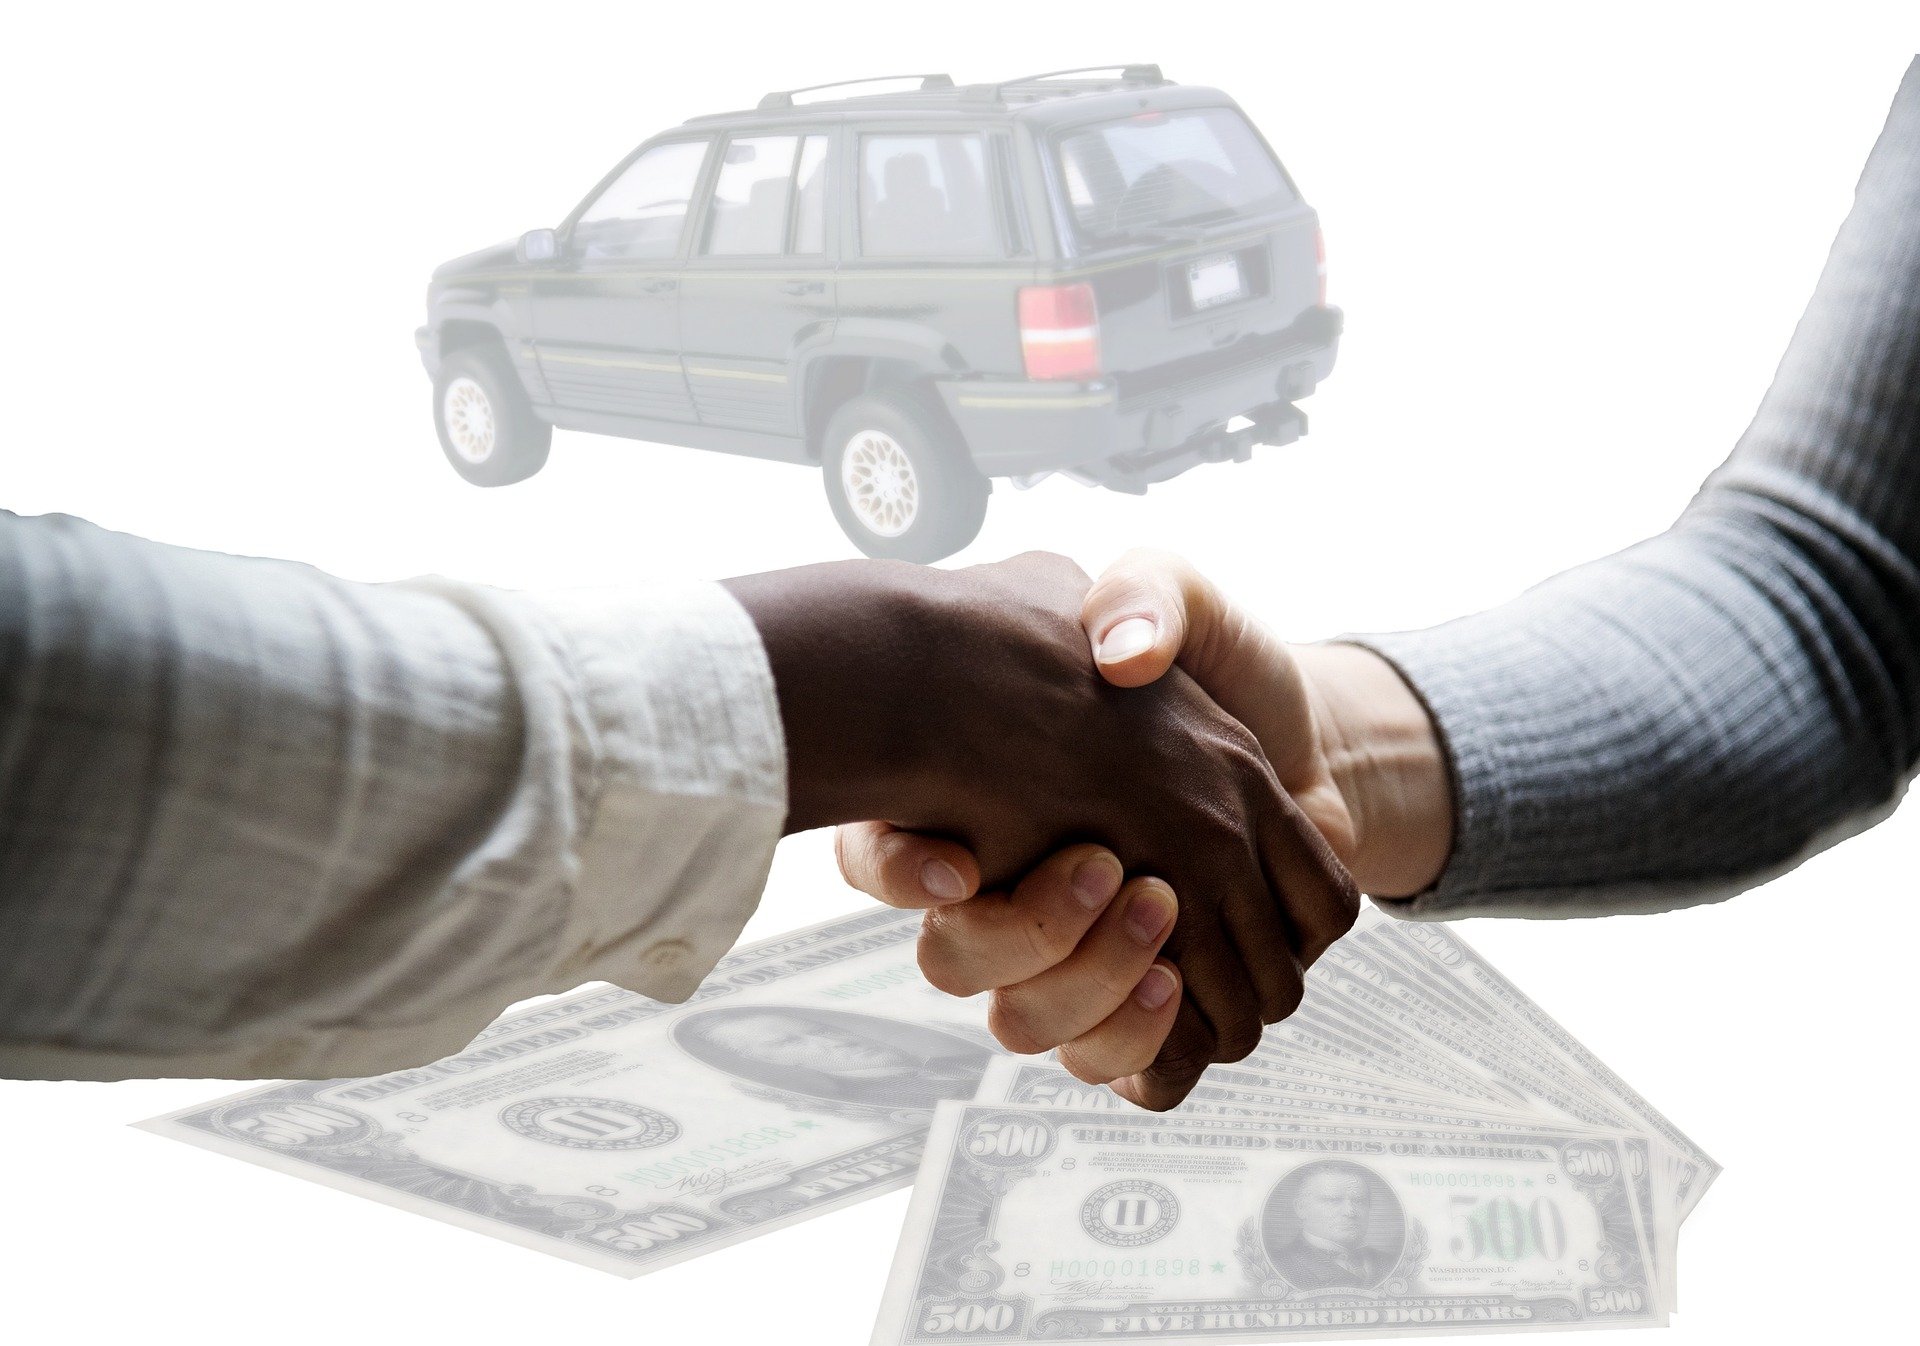 Sell Your Non-Working and Used Car for Cash Quick in Australia